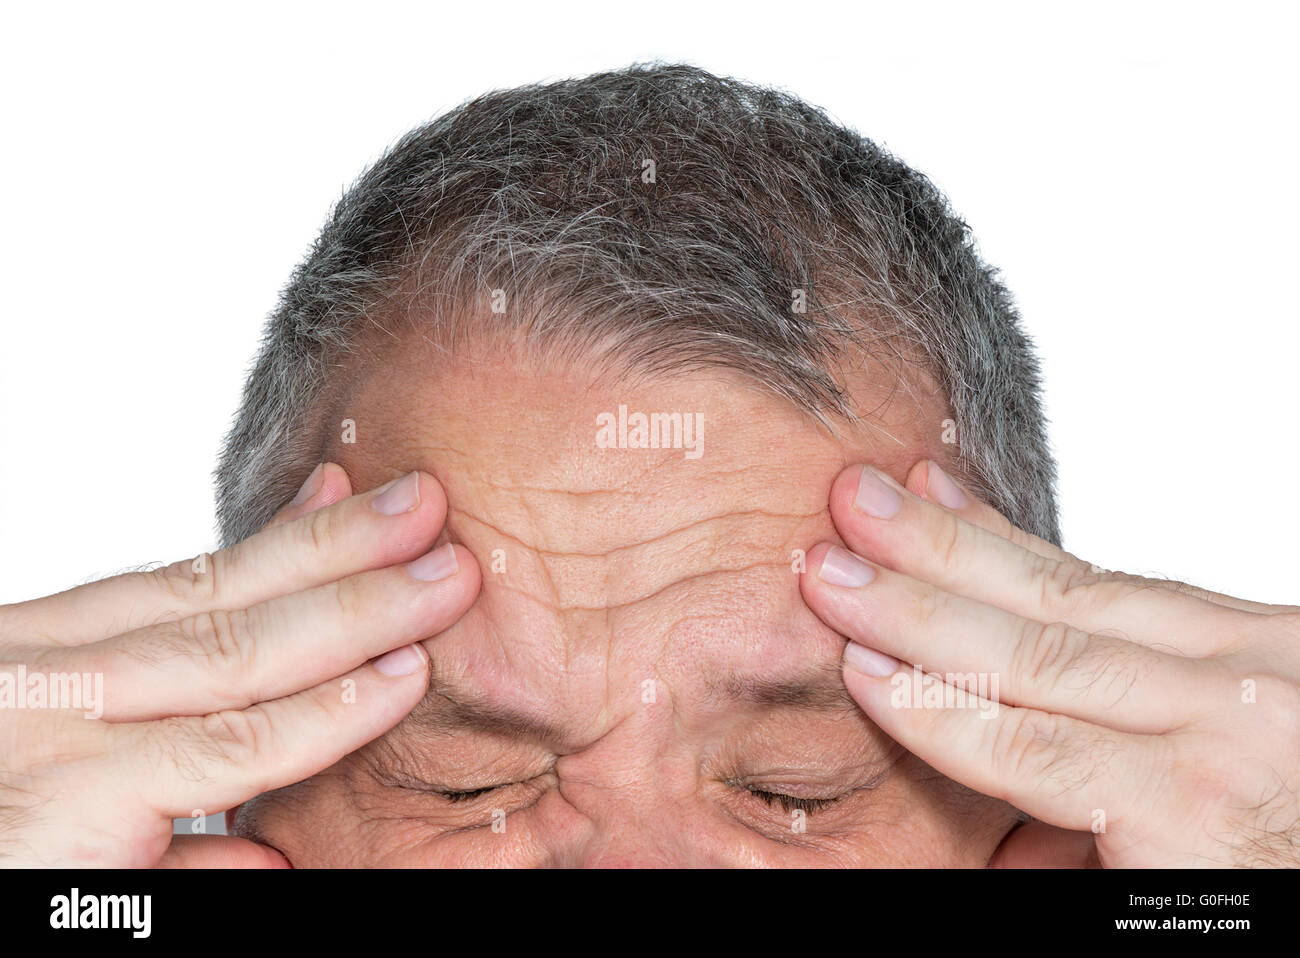 Man with hands on his forehead Stock Photo